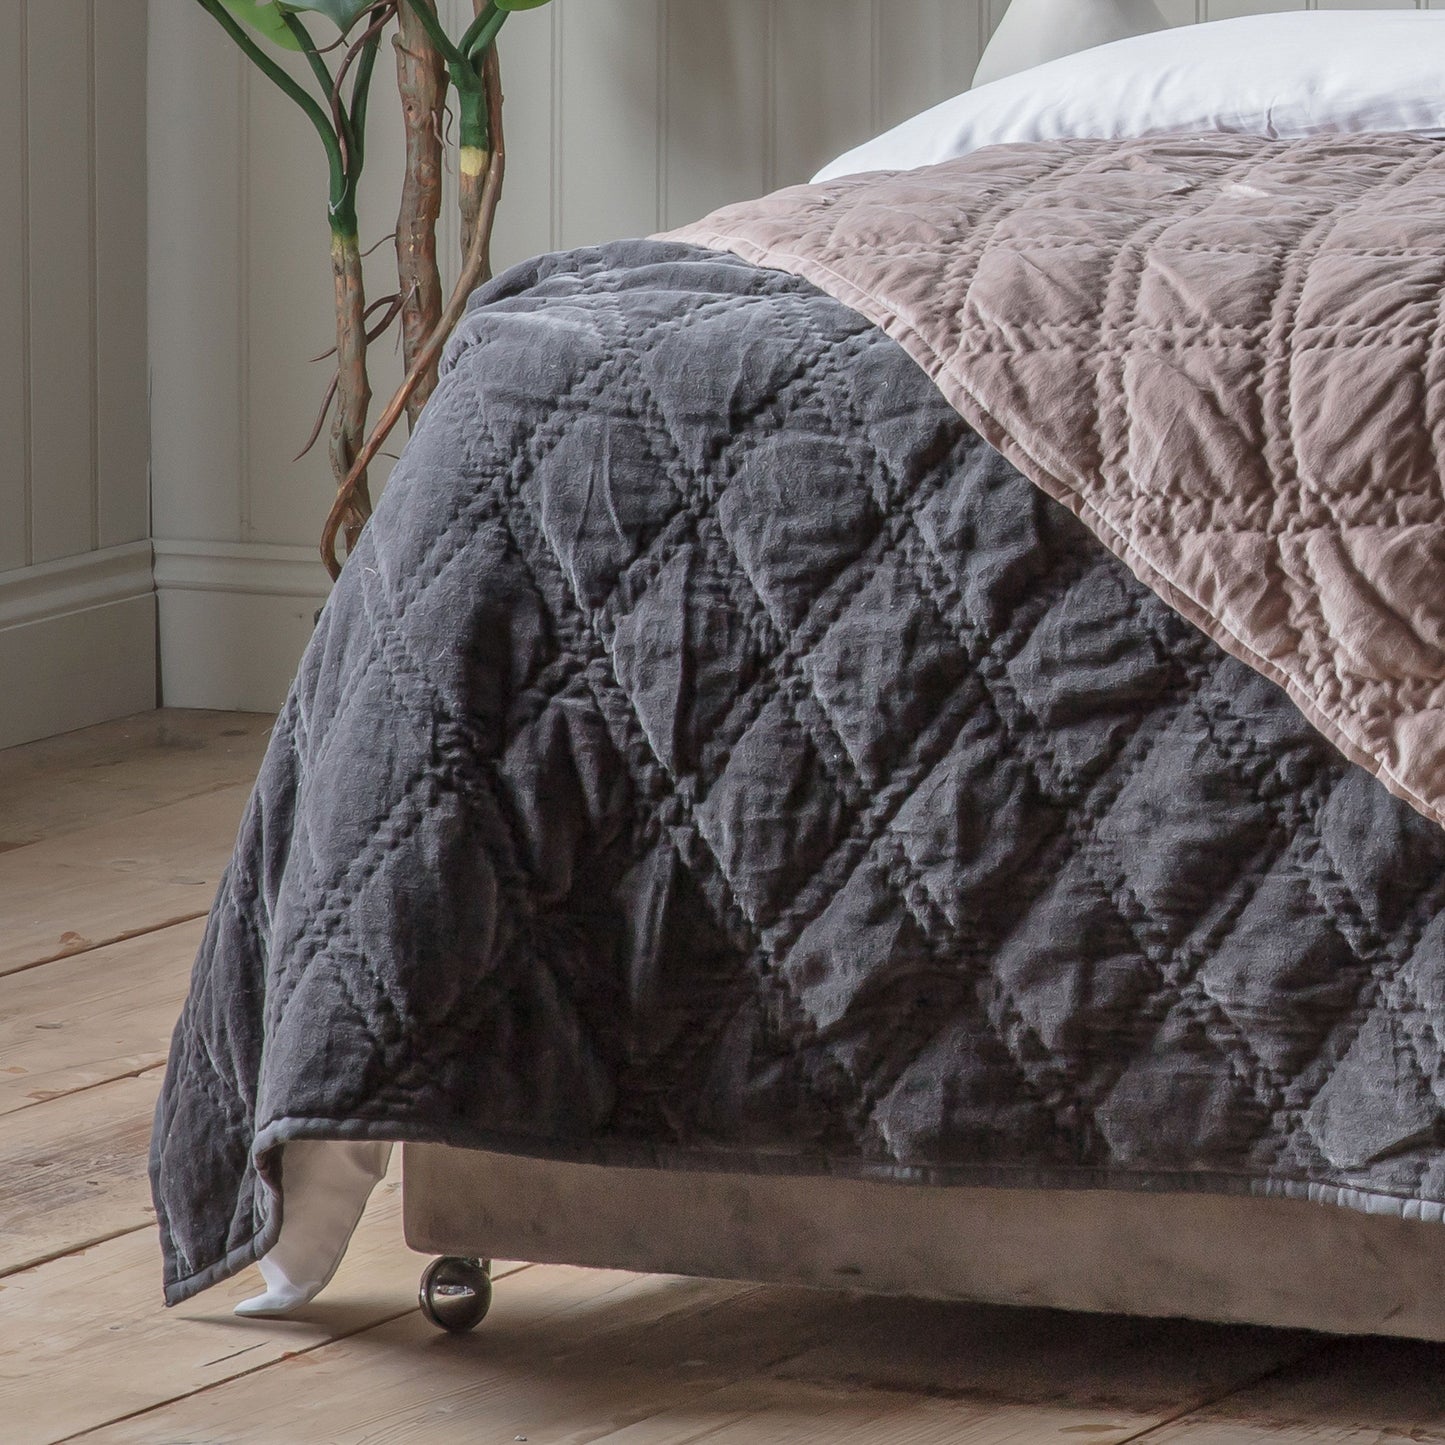 Quilted Diamond Bedspread - Blush